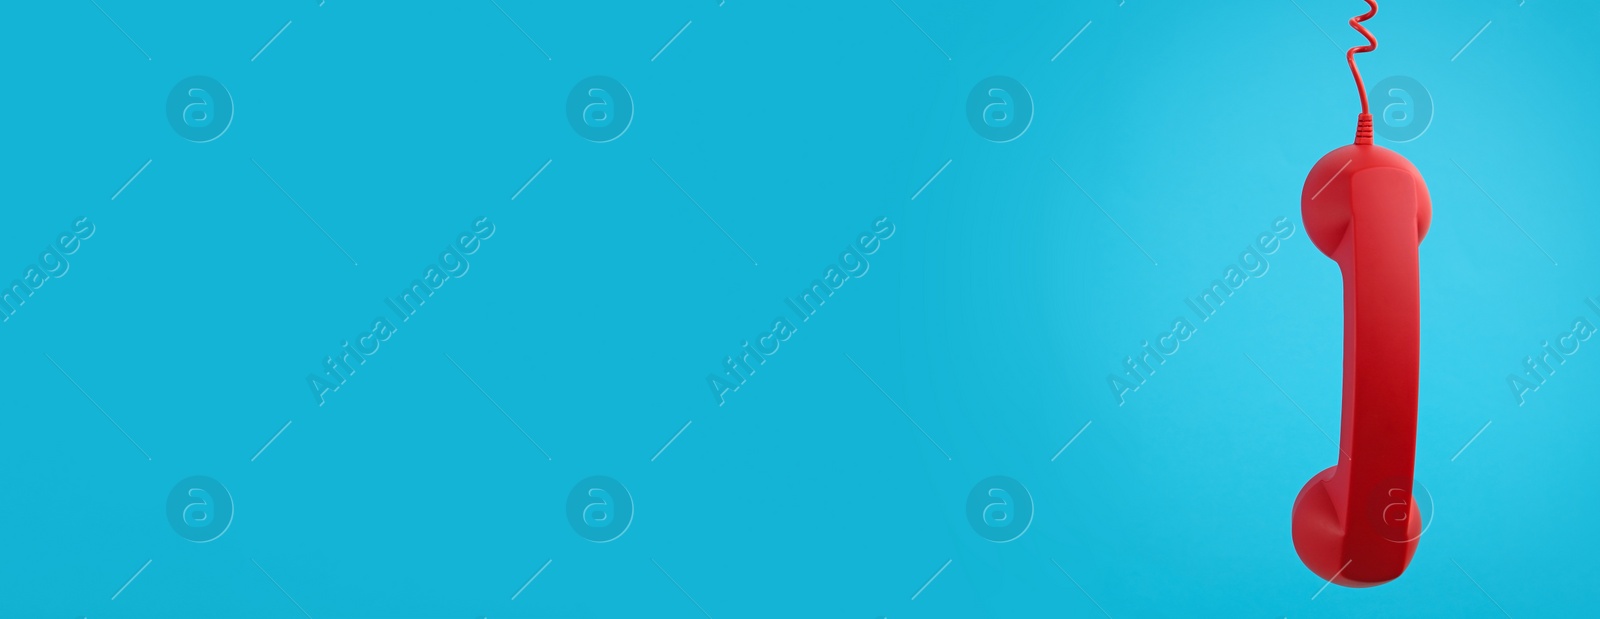 Image of Hotline service. Red telephone receiver and space for text on light blue background, banner design